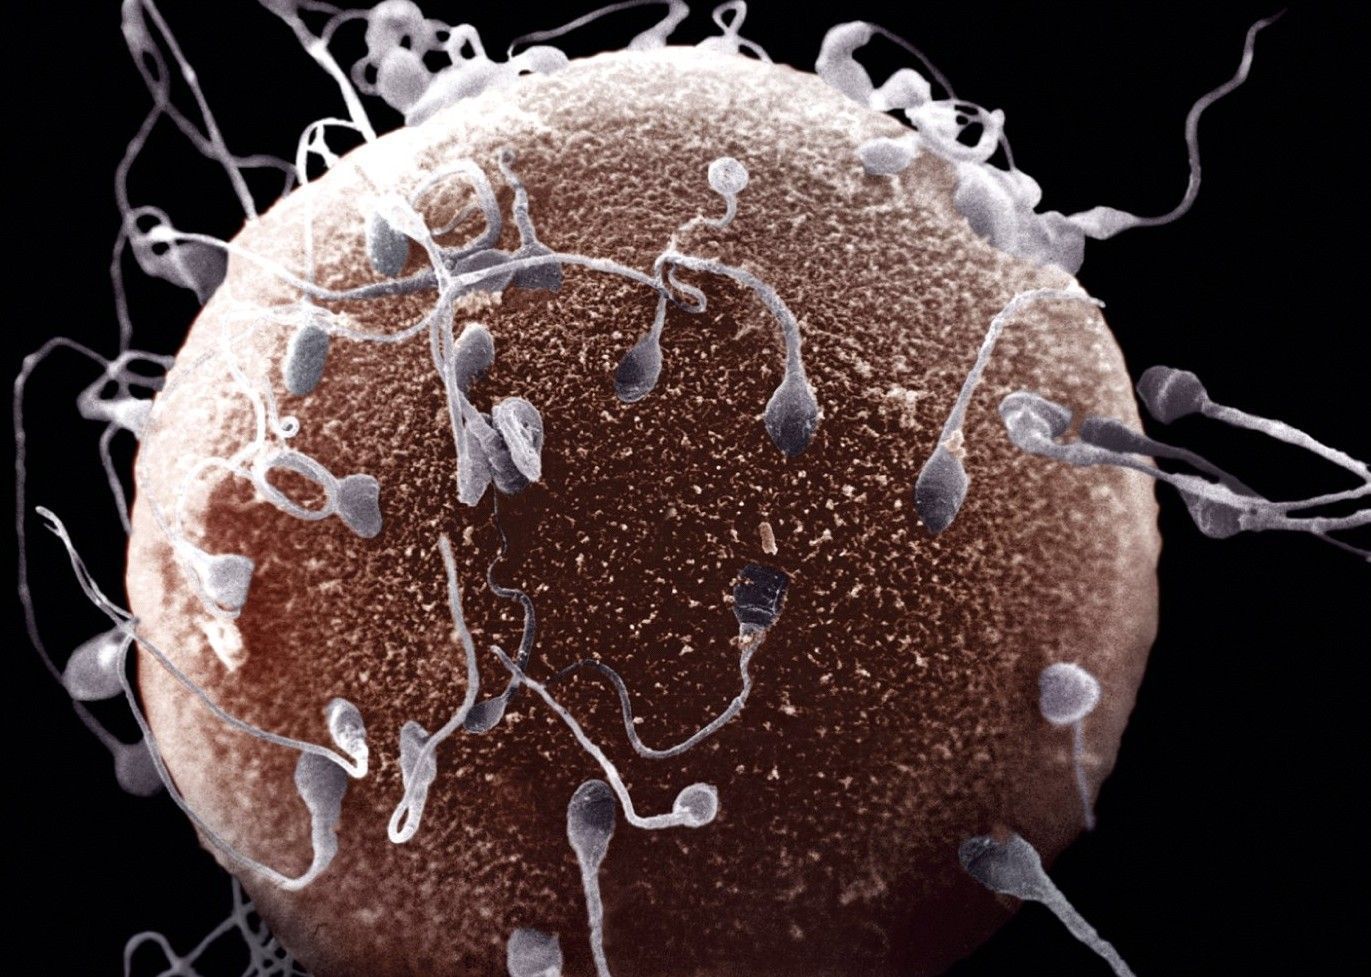 How sperm live in vagina